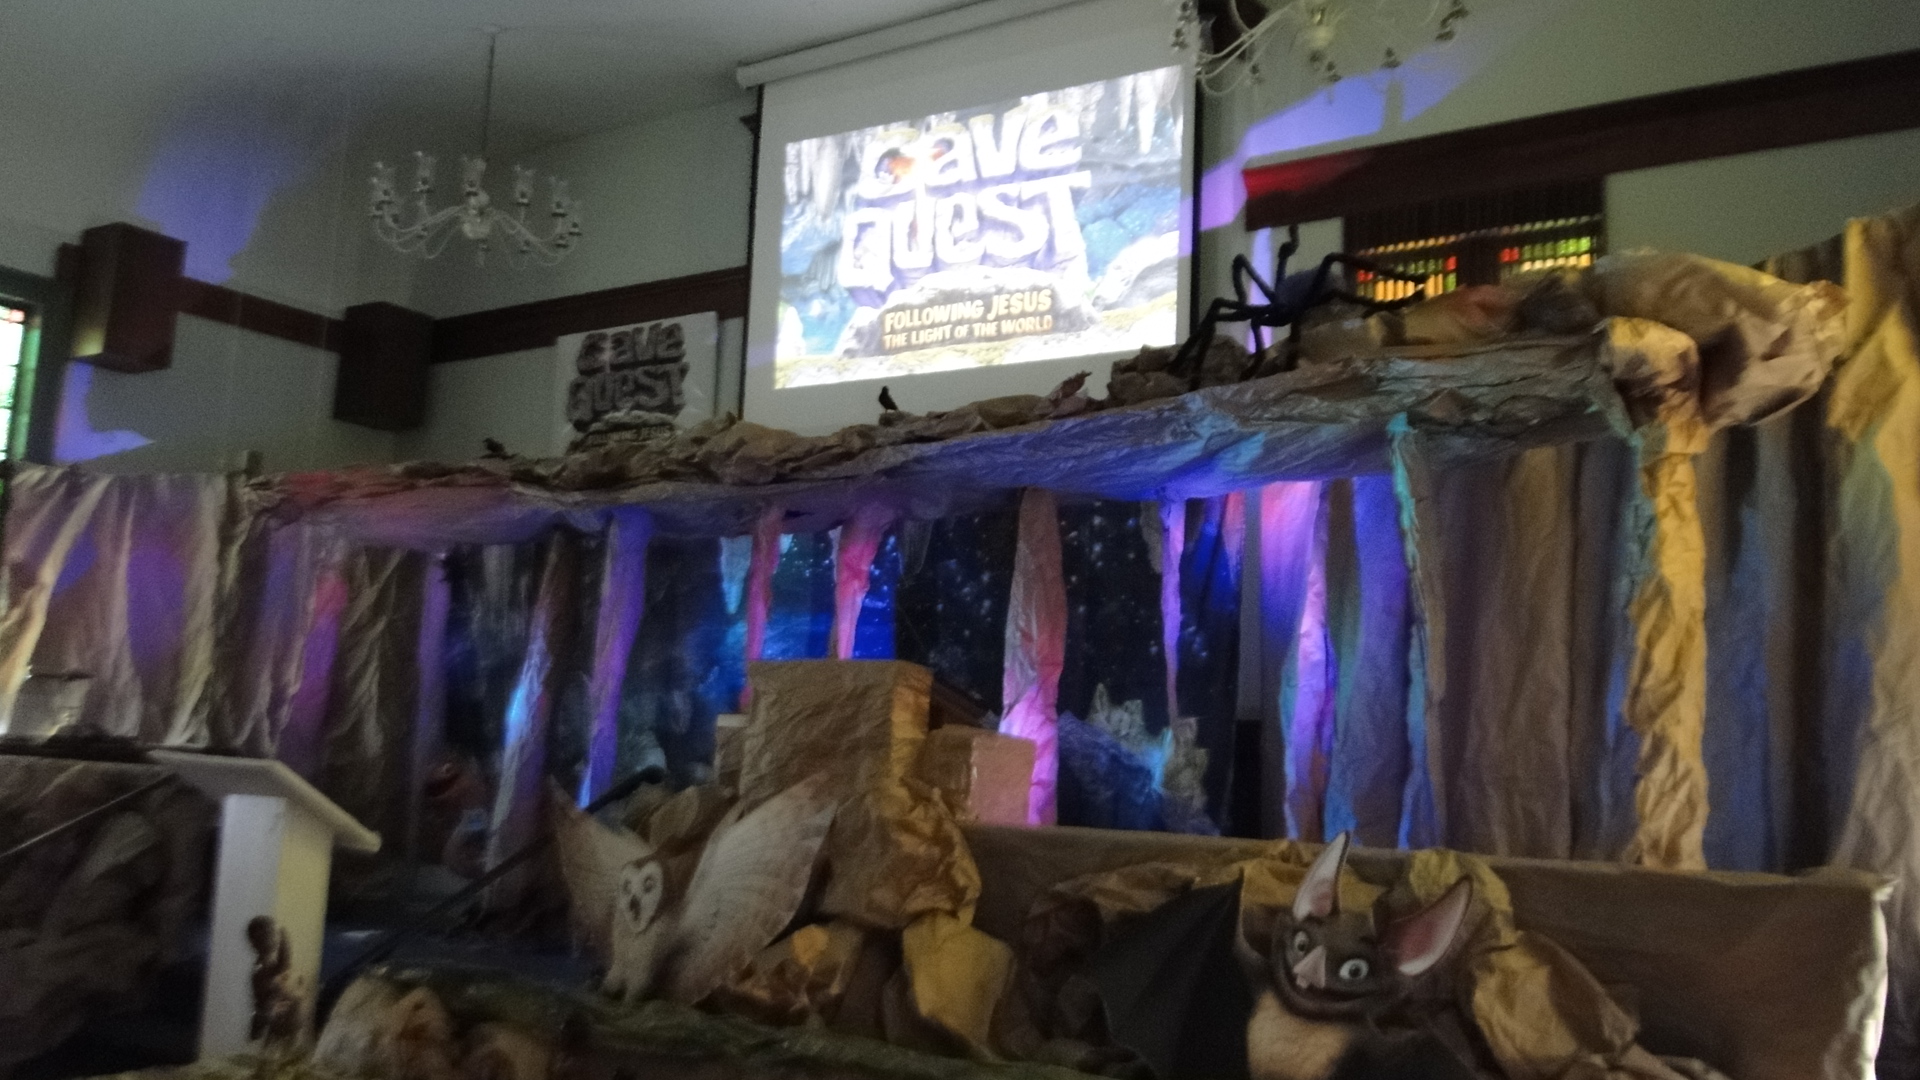 Cave vbs